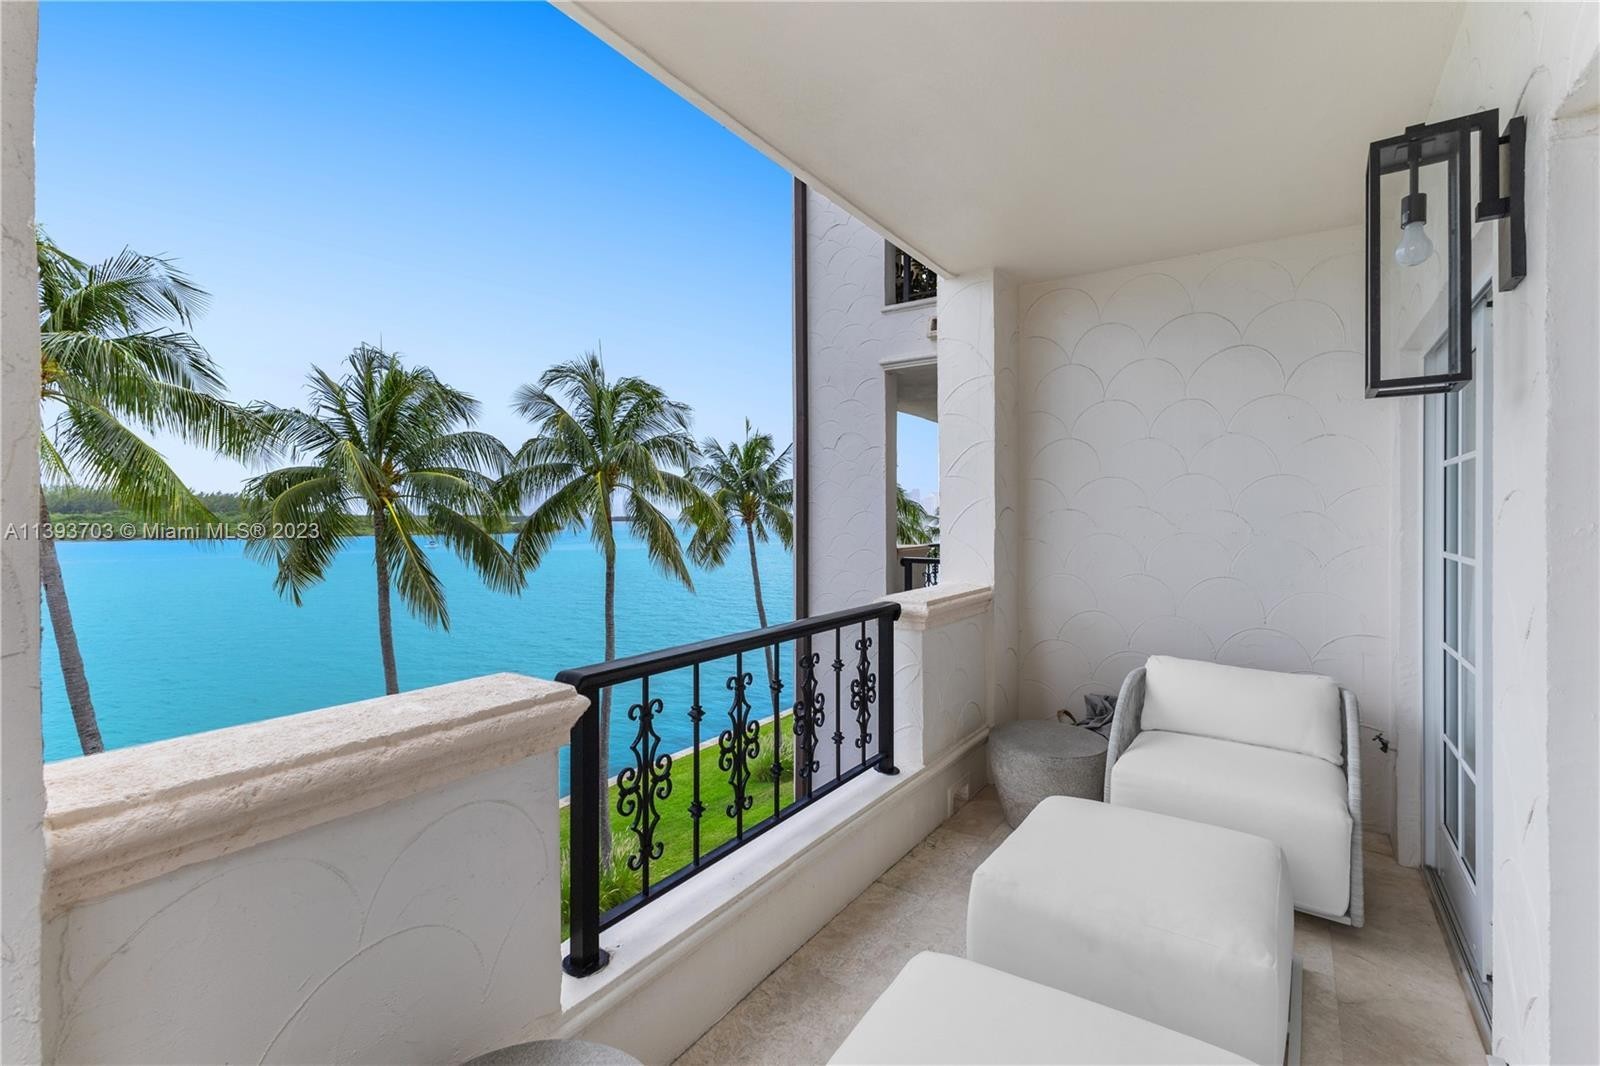 39. 2436 Fisher Island Dr